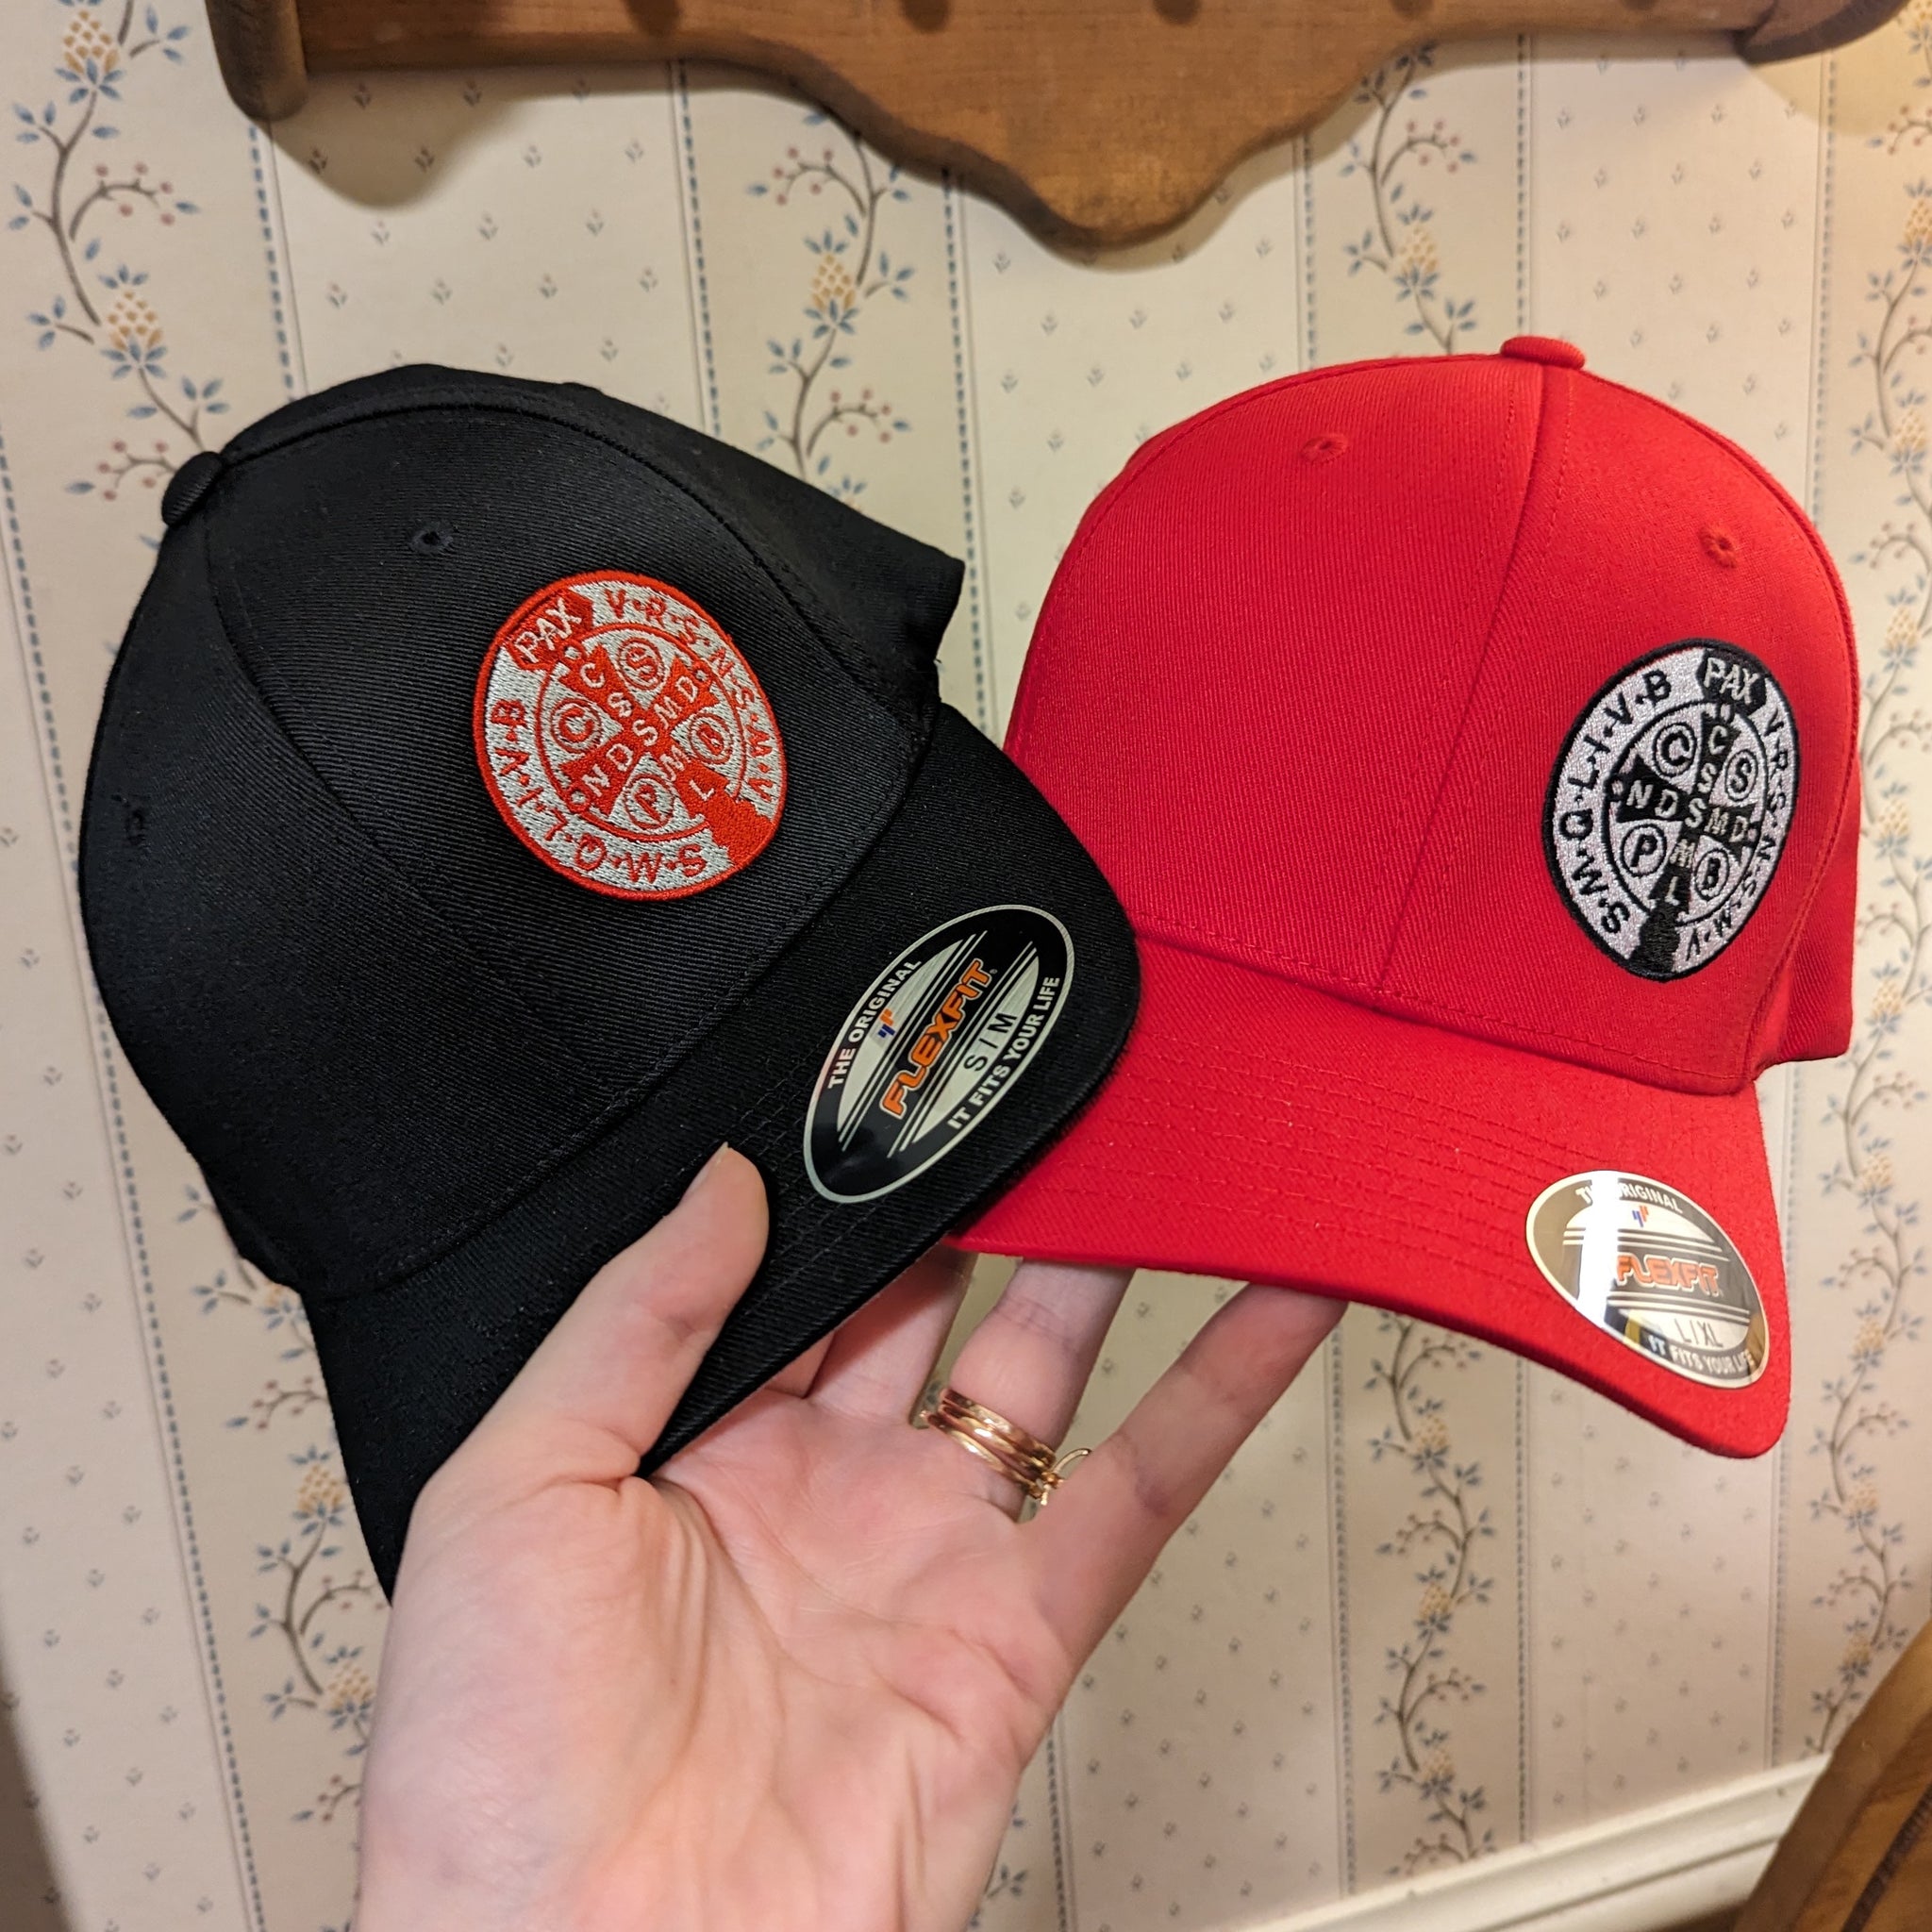 St. Benedict Medal baseball hats in black and red